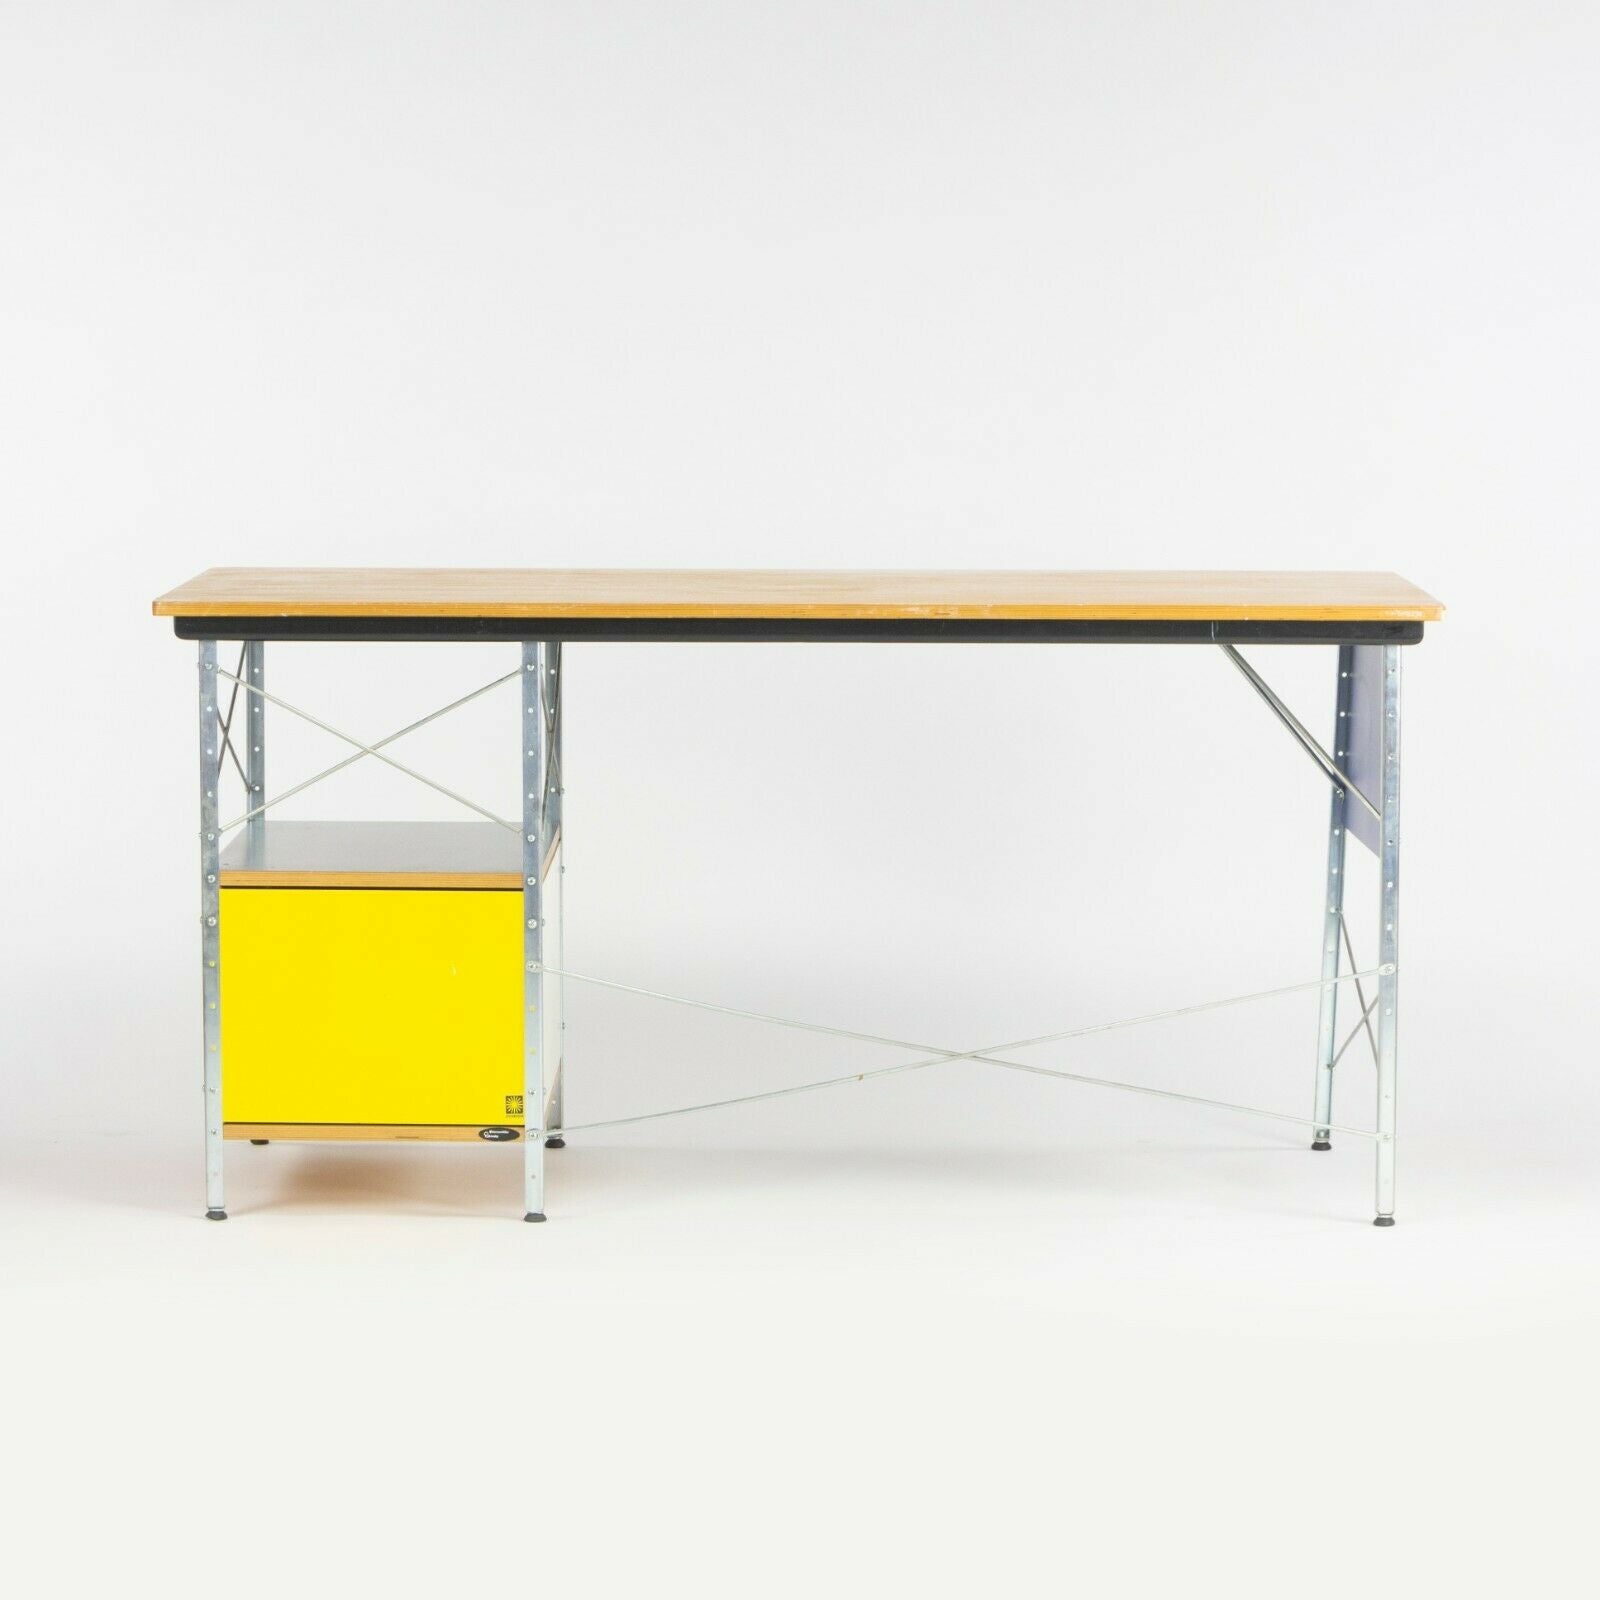 SOLD Charles & Ray Eames for Herman Miller 2000s EDU Desk Multi Color w/ Wood Top